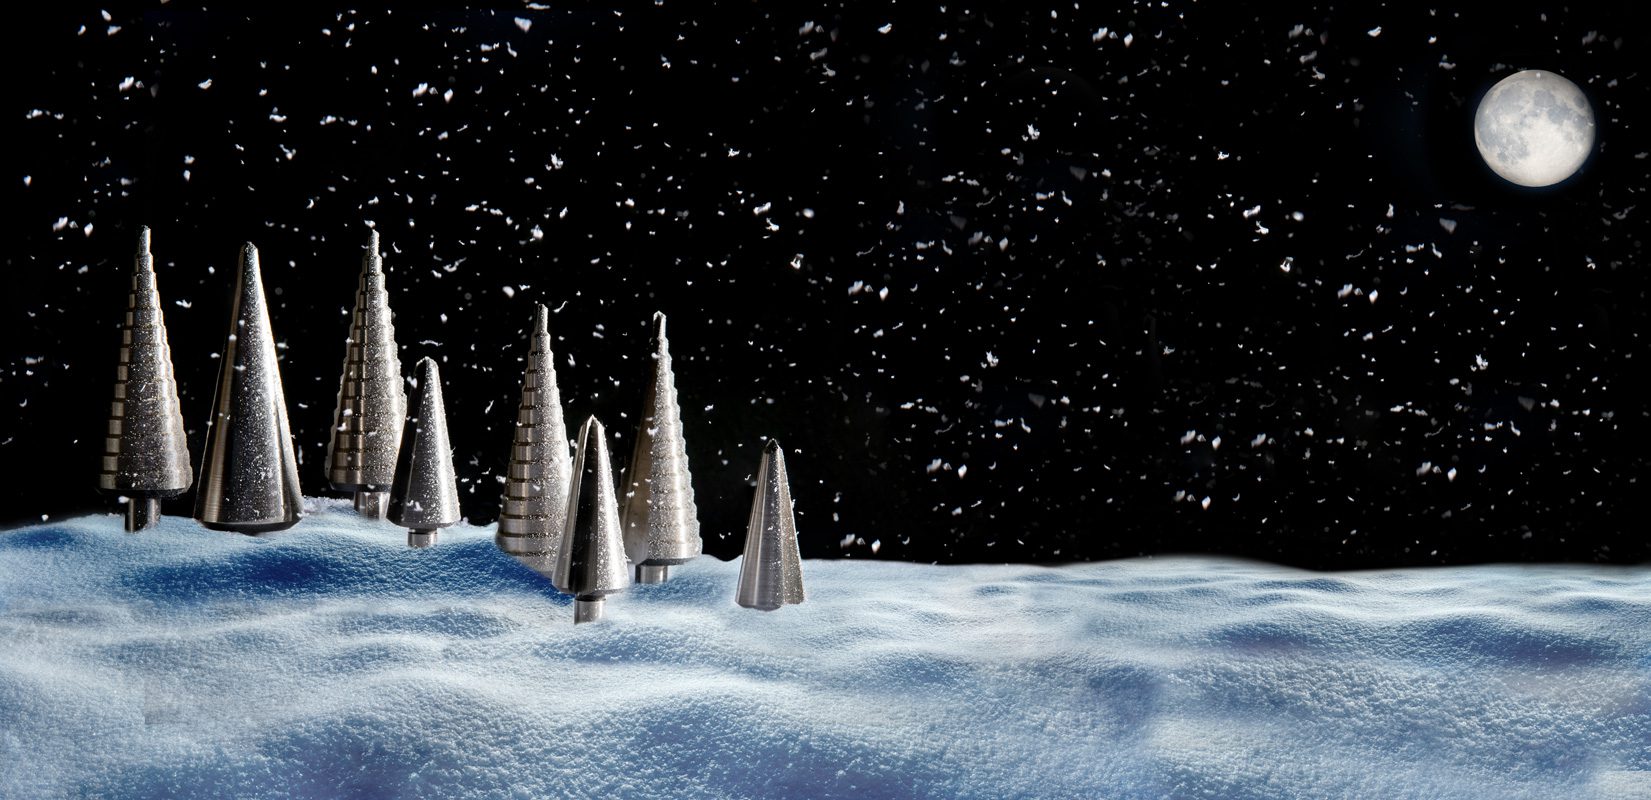 Reisser drill bits used to create a festive scene. Photography by Sara Porter